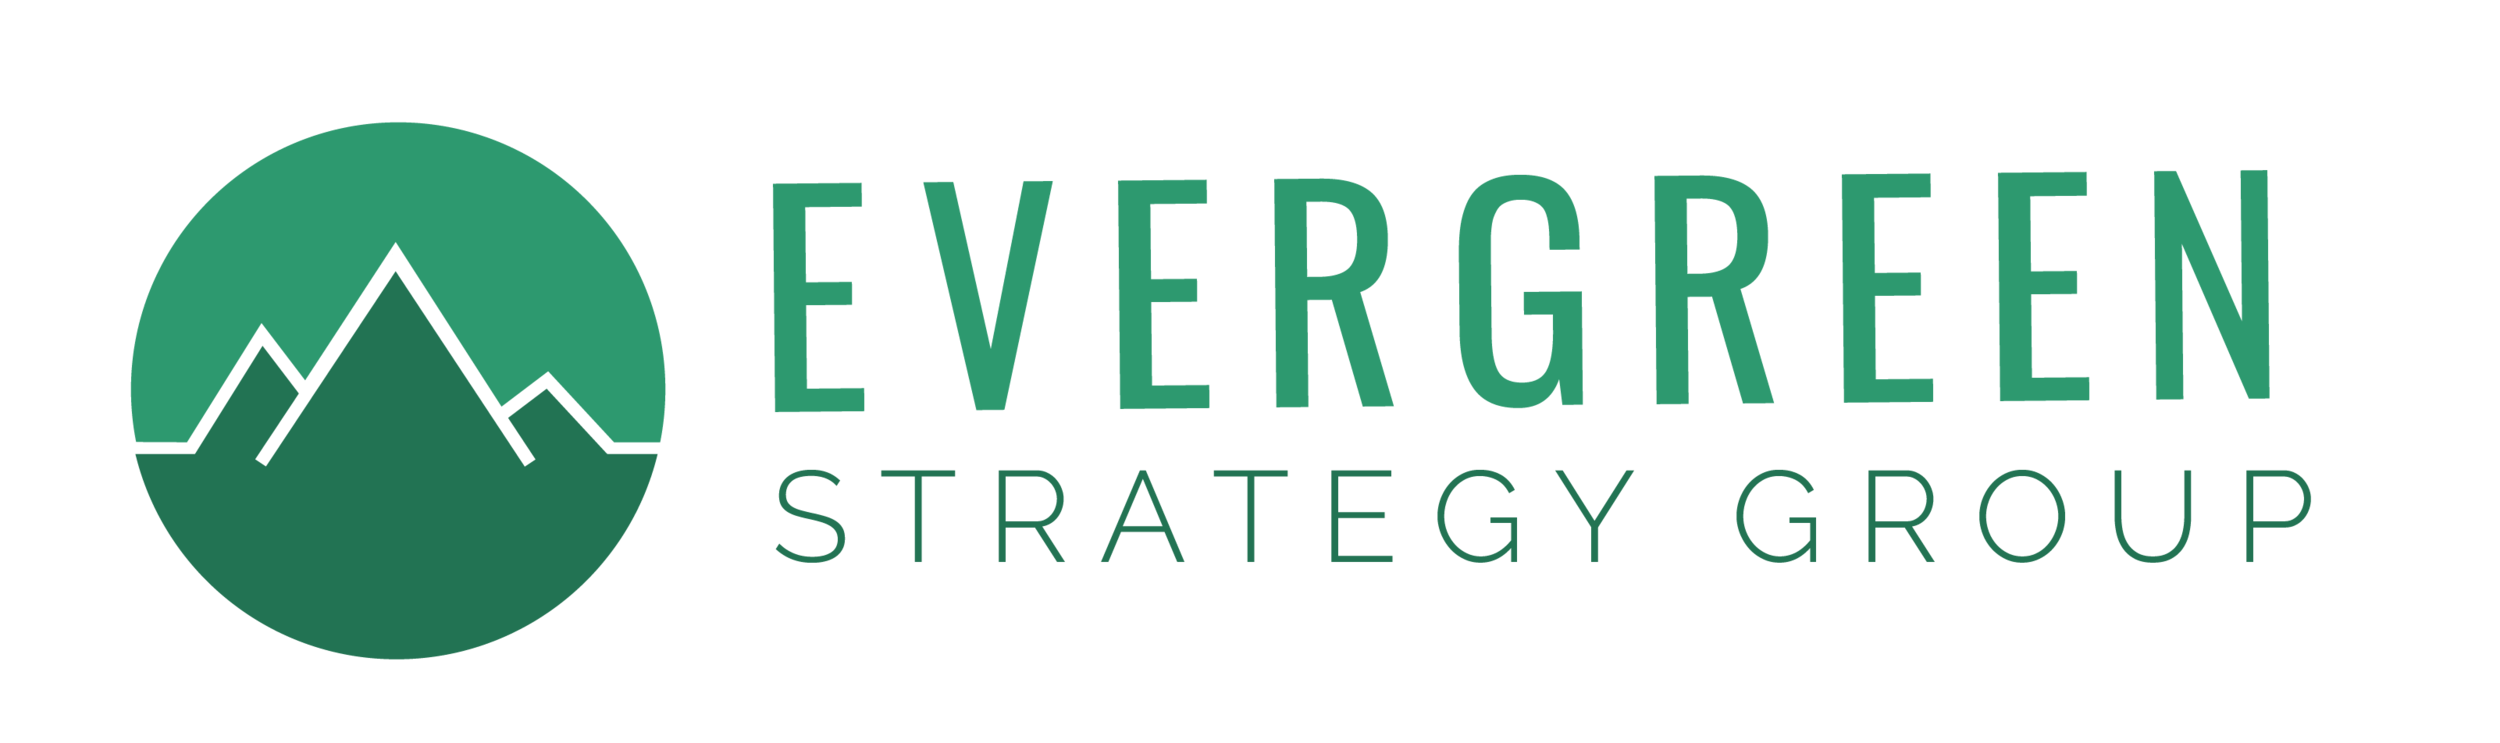 Evergreen Strategy Group